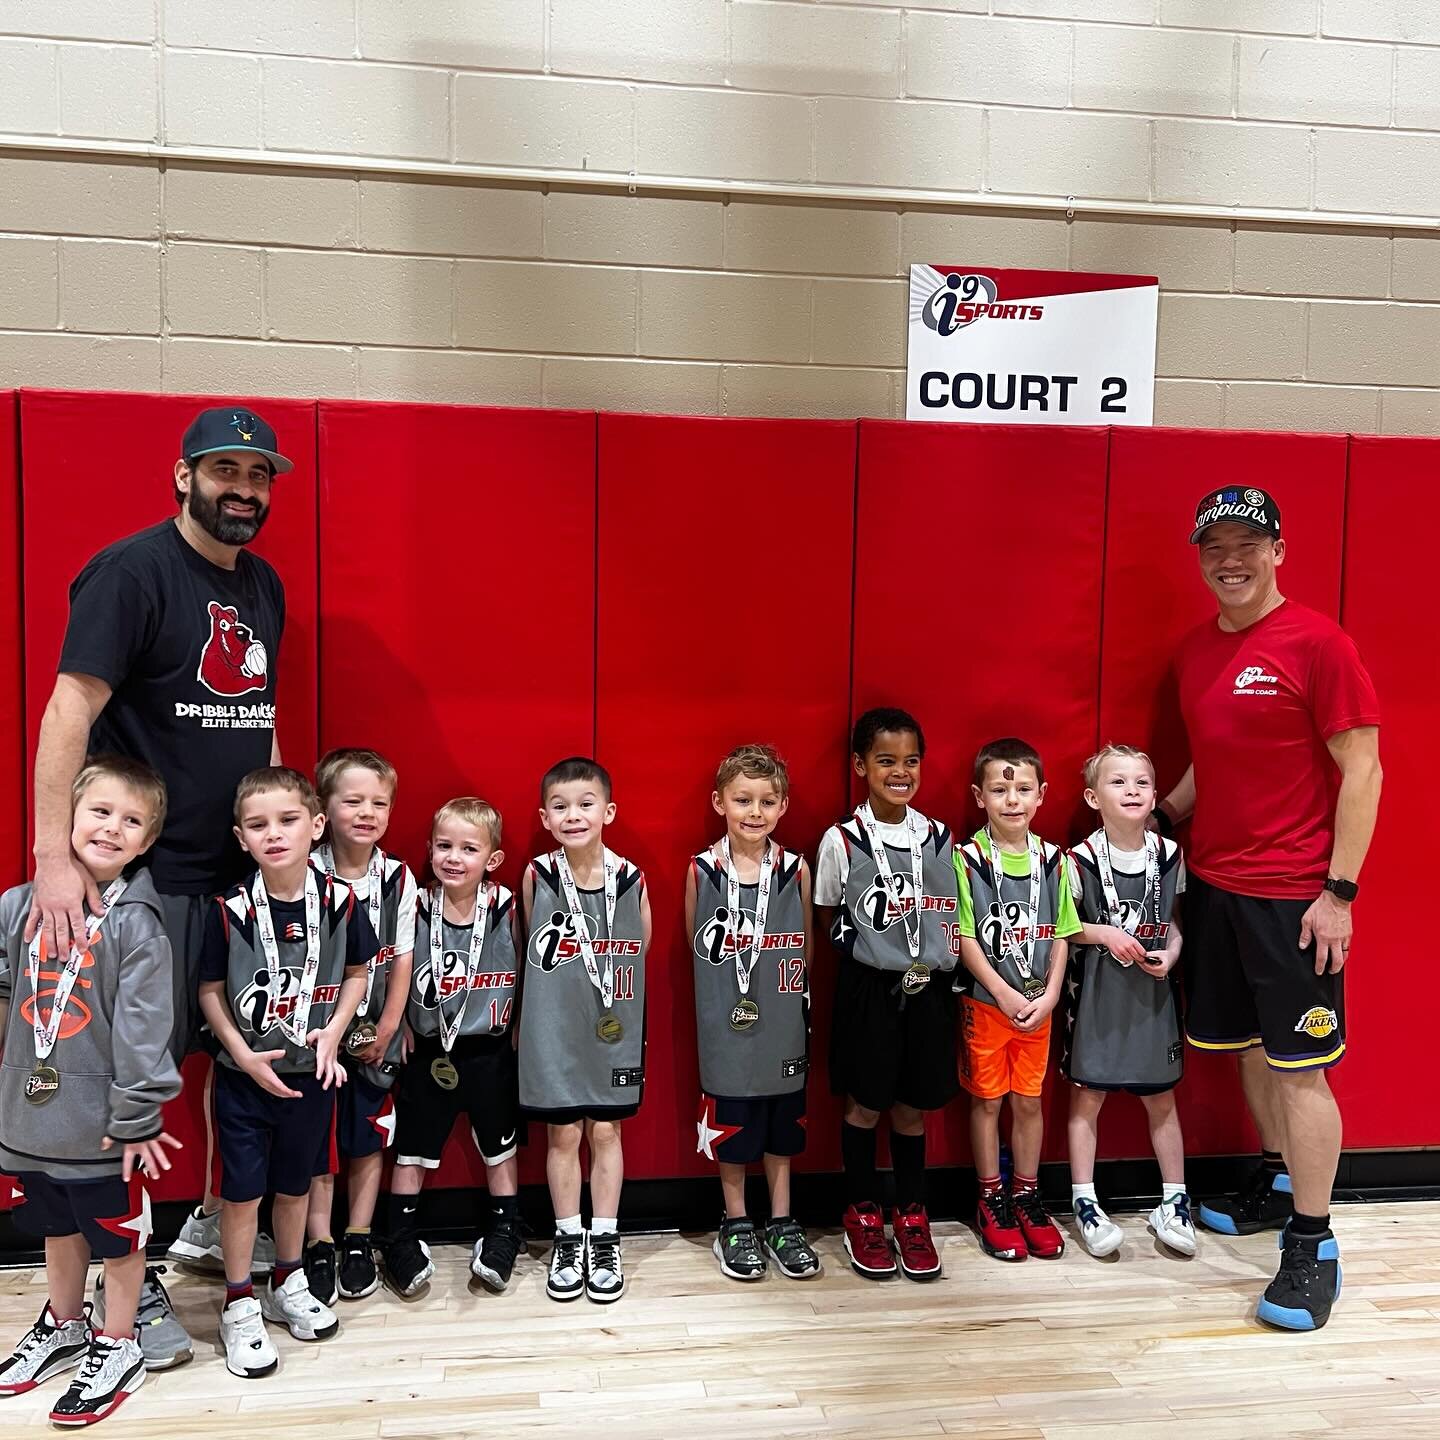 Fun Season for the Little Nuggets! 
So fun watching the beginning of sports for these 4-5 year olds.  Getting to have your friends kids play together is the dream